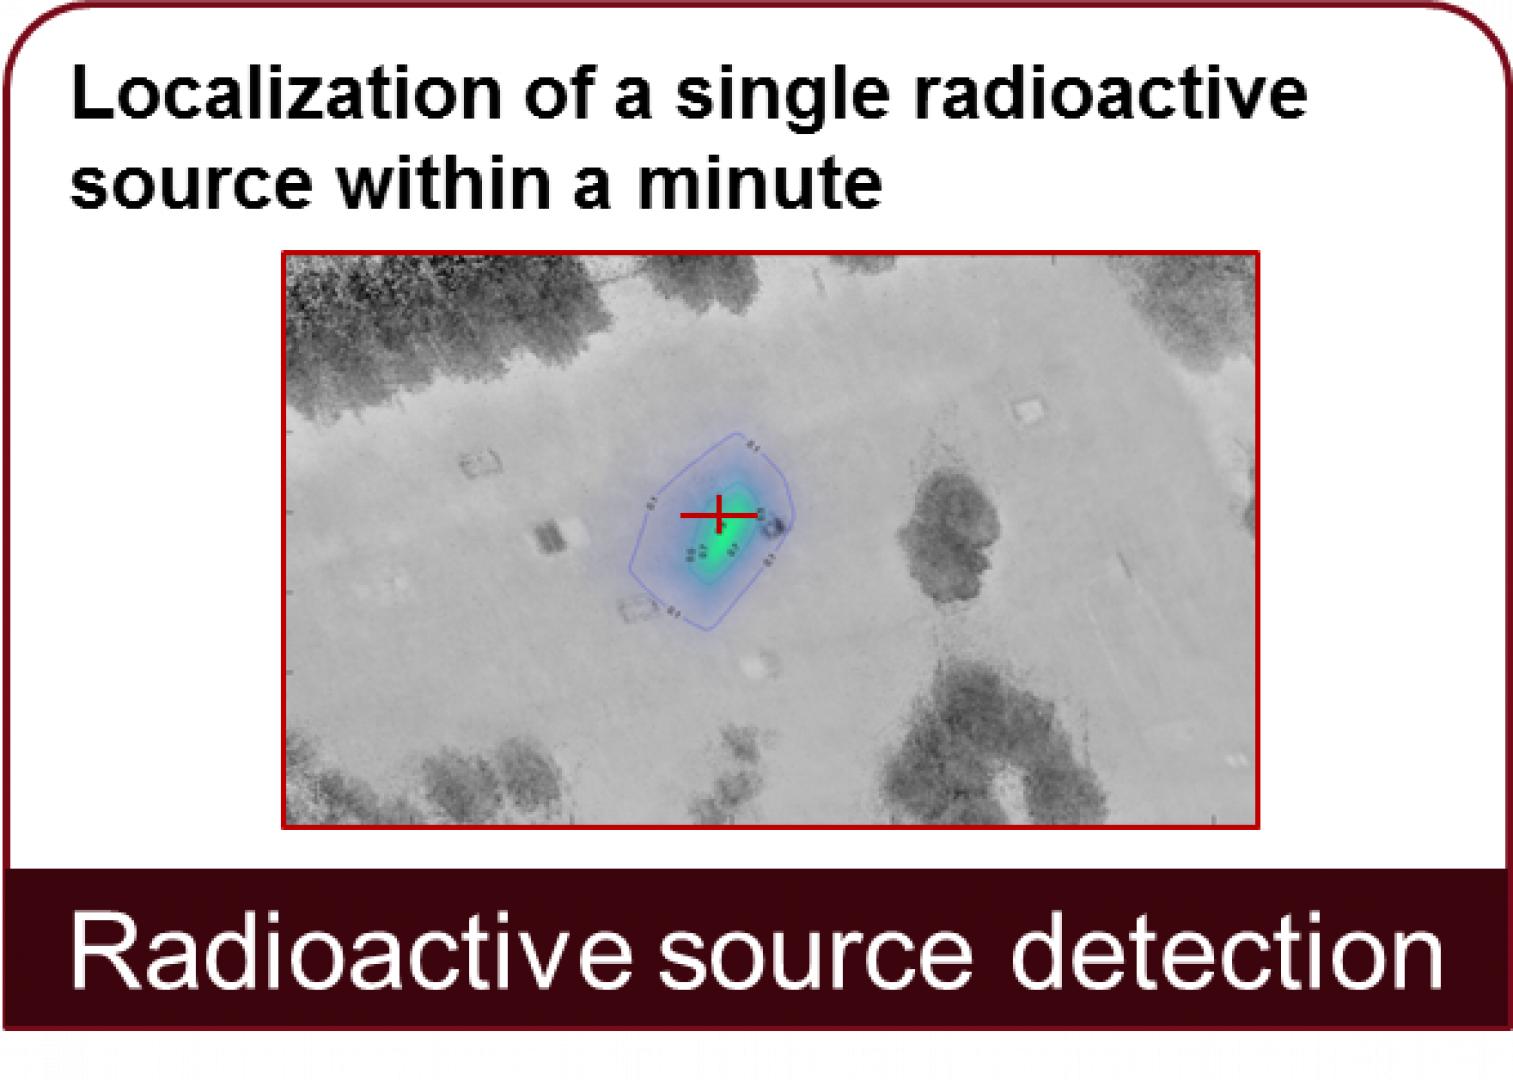 Radioactive source detection: Localization of a single radioactive source within a minute